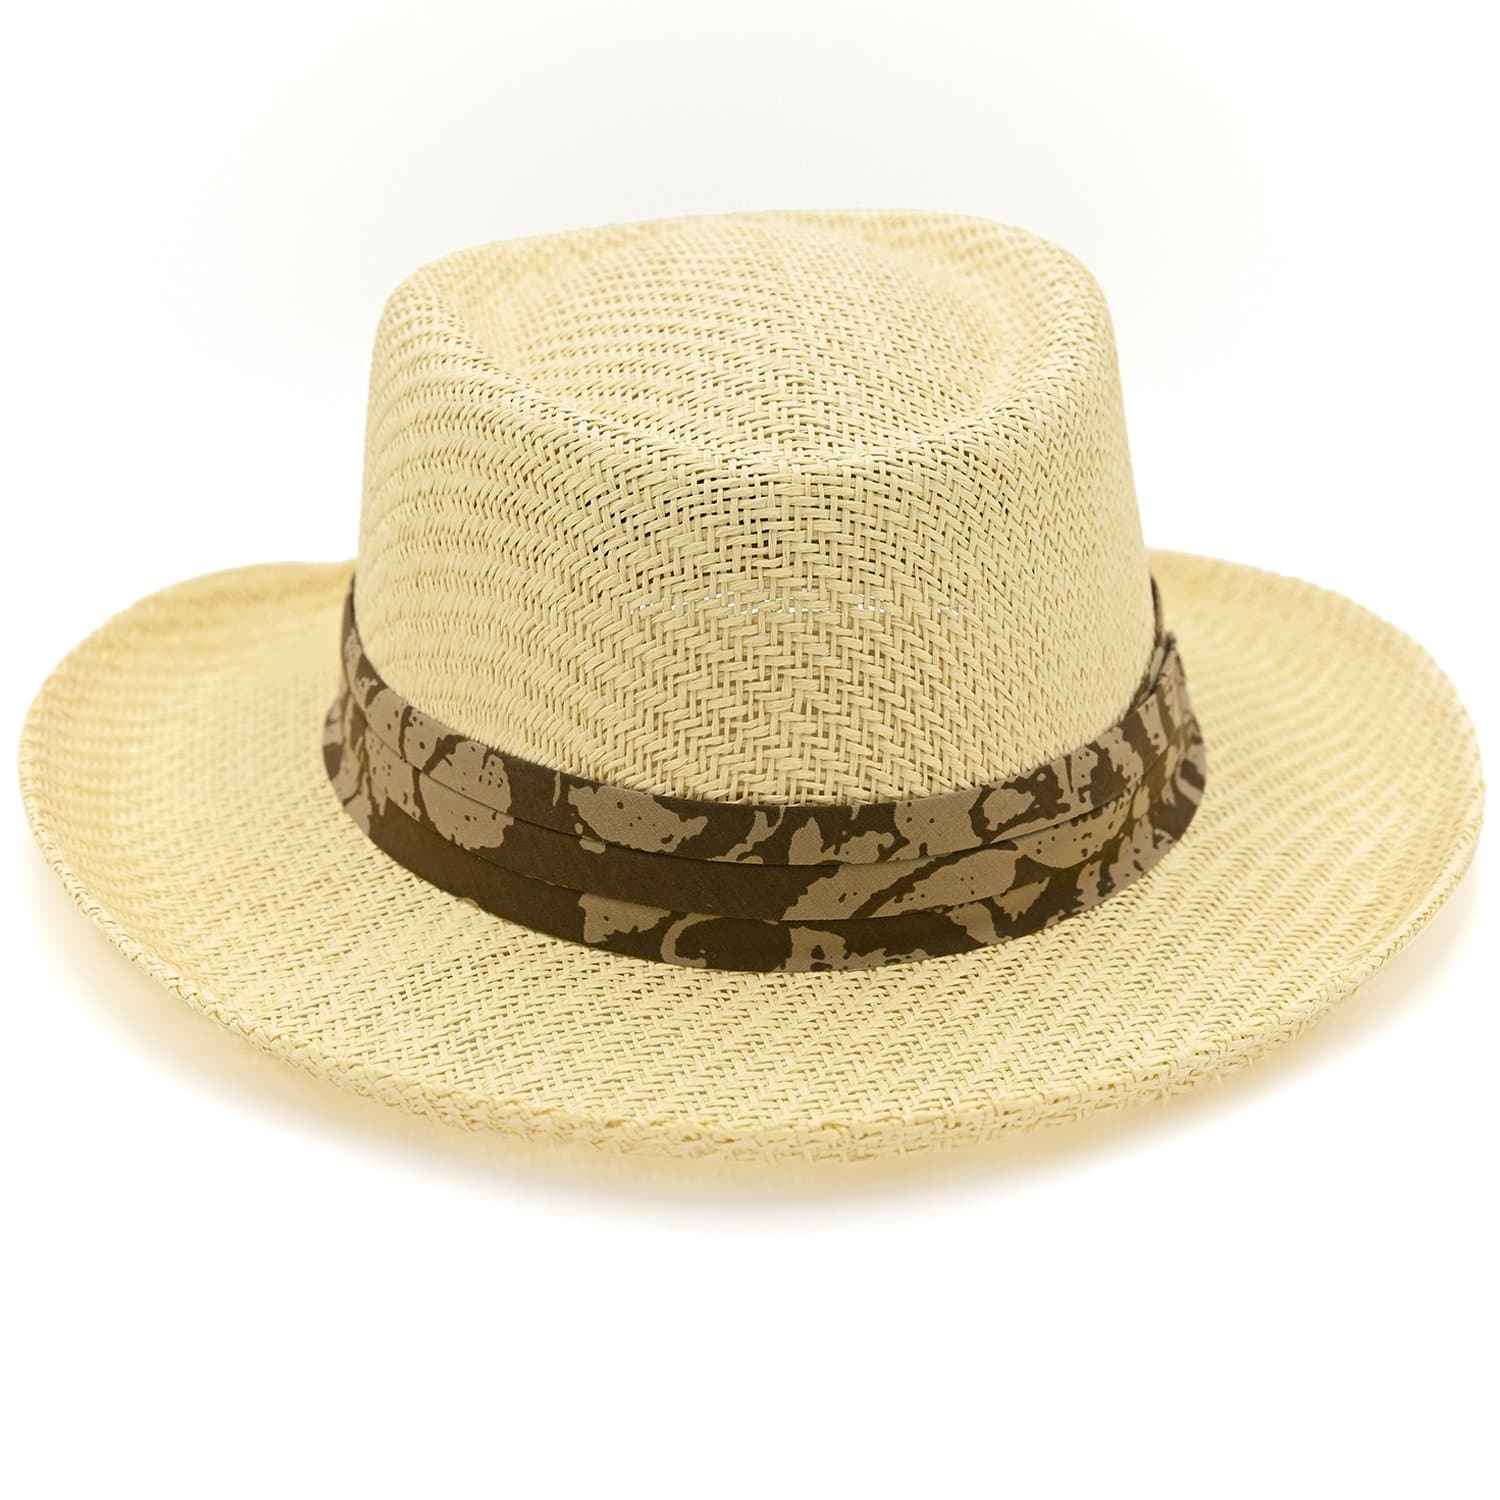 Best Selling Hats: Lightweight, Breathable, Durable – Panama Jack®